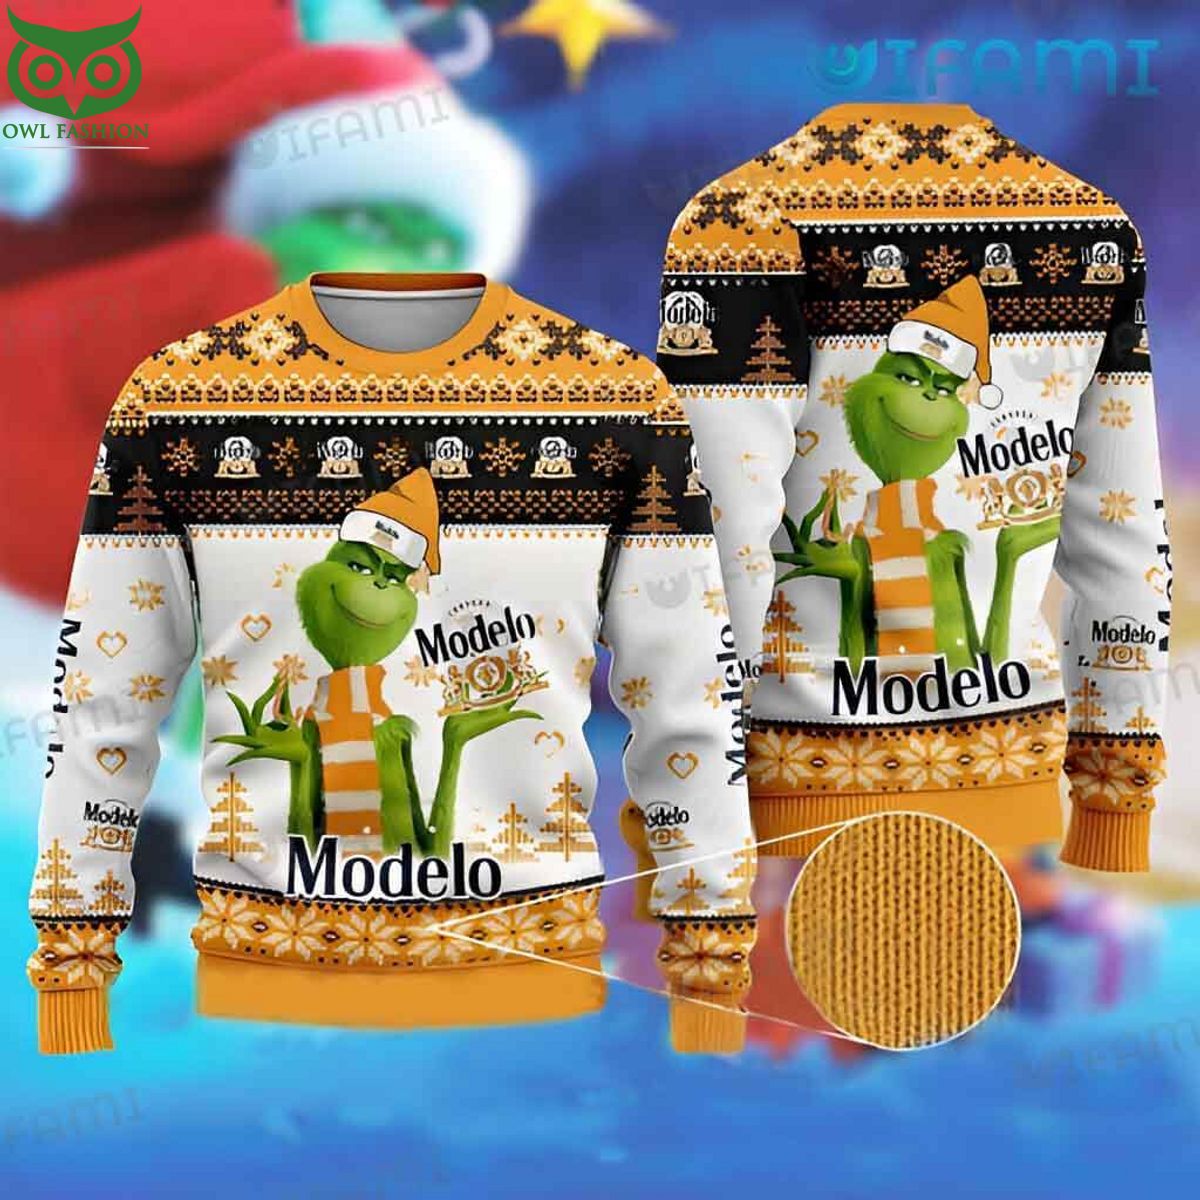 grinch modelo ugly christmas sweater beer lovers gift 1 ubQxP.jpg